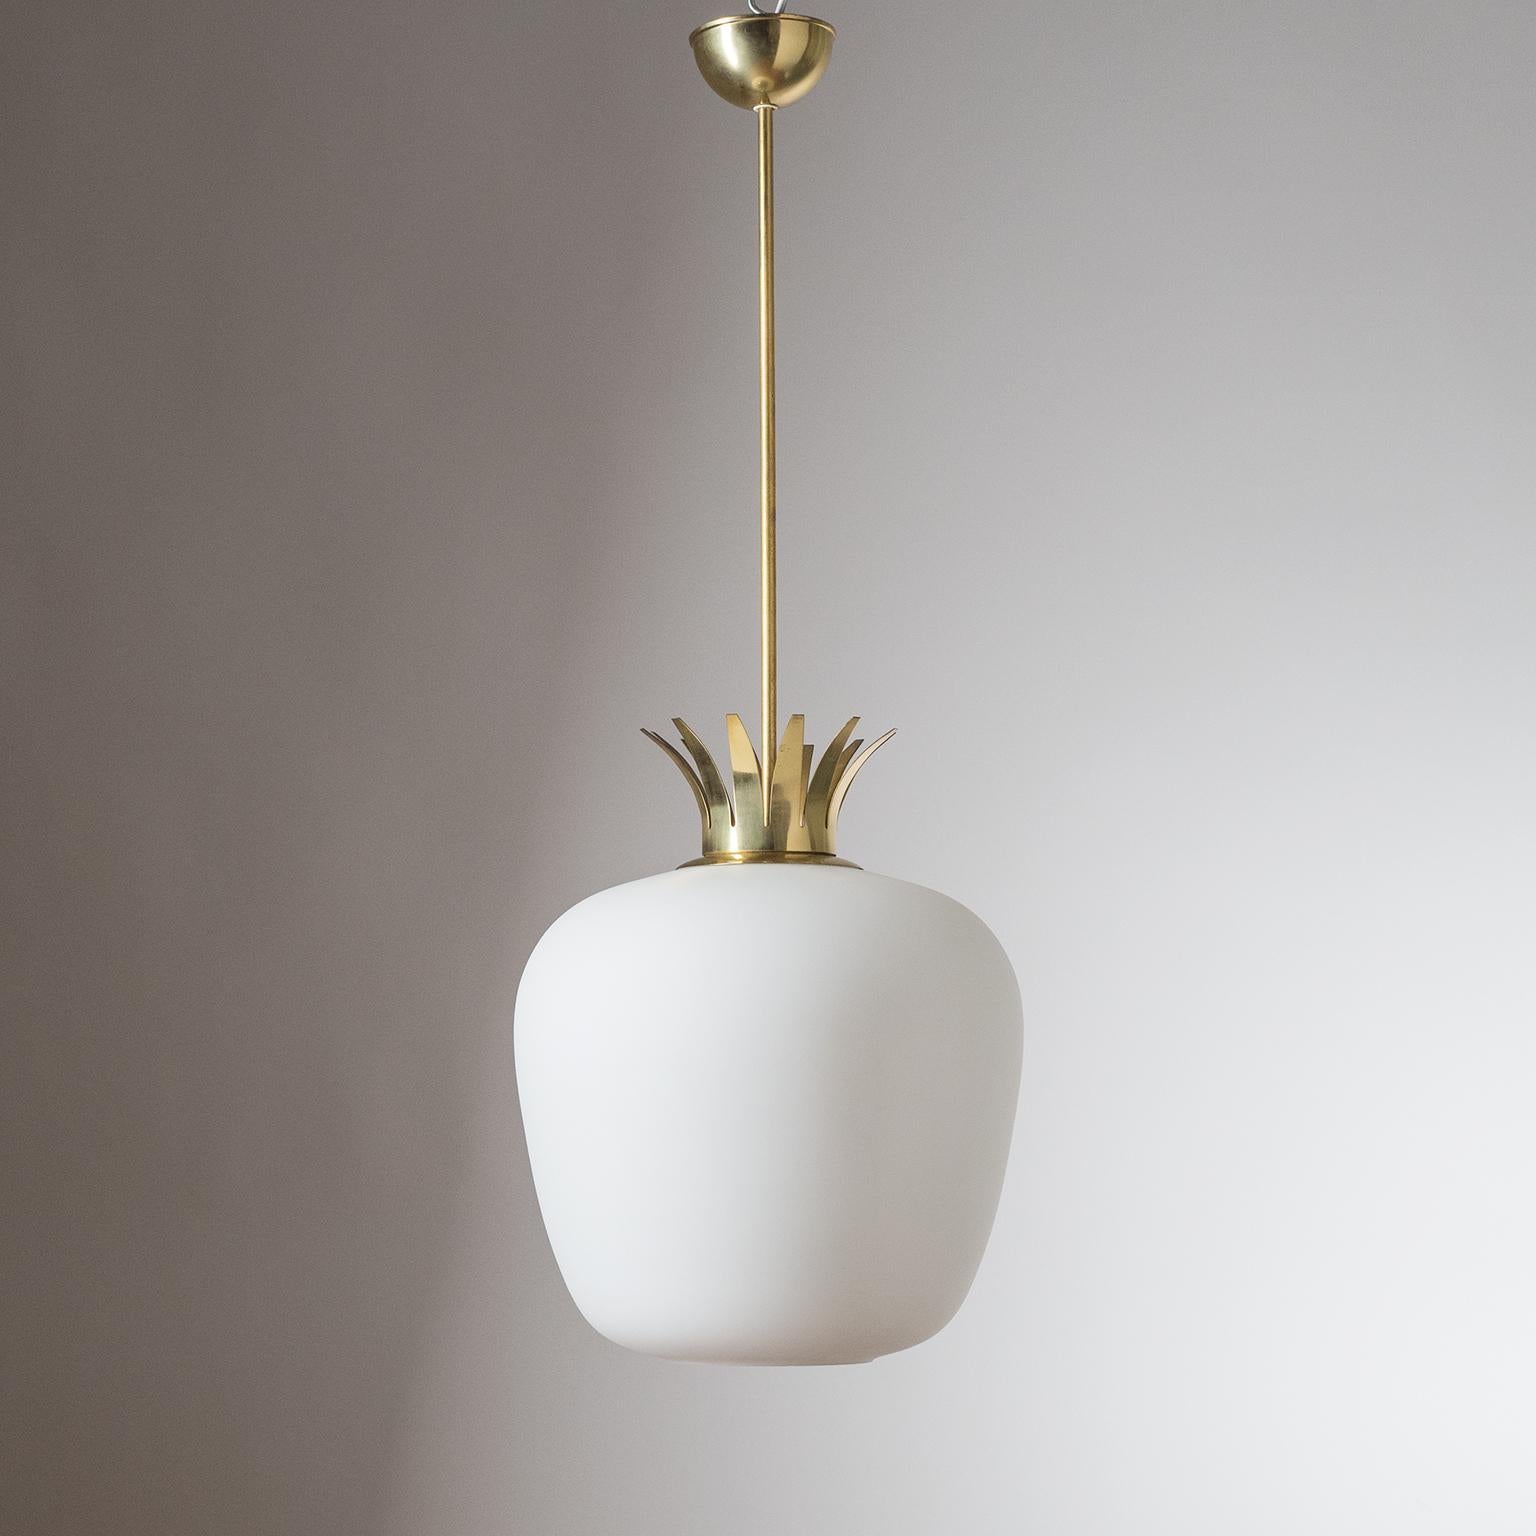 Rare Austrian pendant or lantern from the 1950s. A large and tapered satin glass diffuser with a brass 'crown' on top. One original brass E27 socket with new wiring. Height without stem is circa 15inches/39cm.